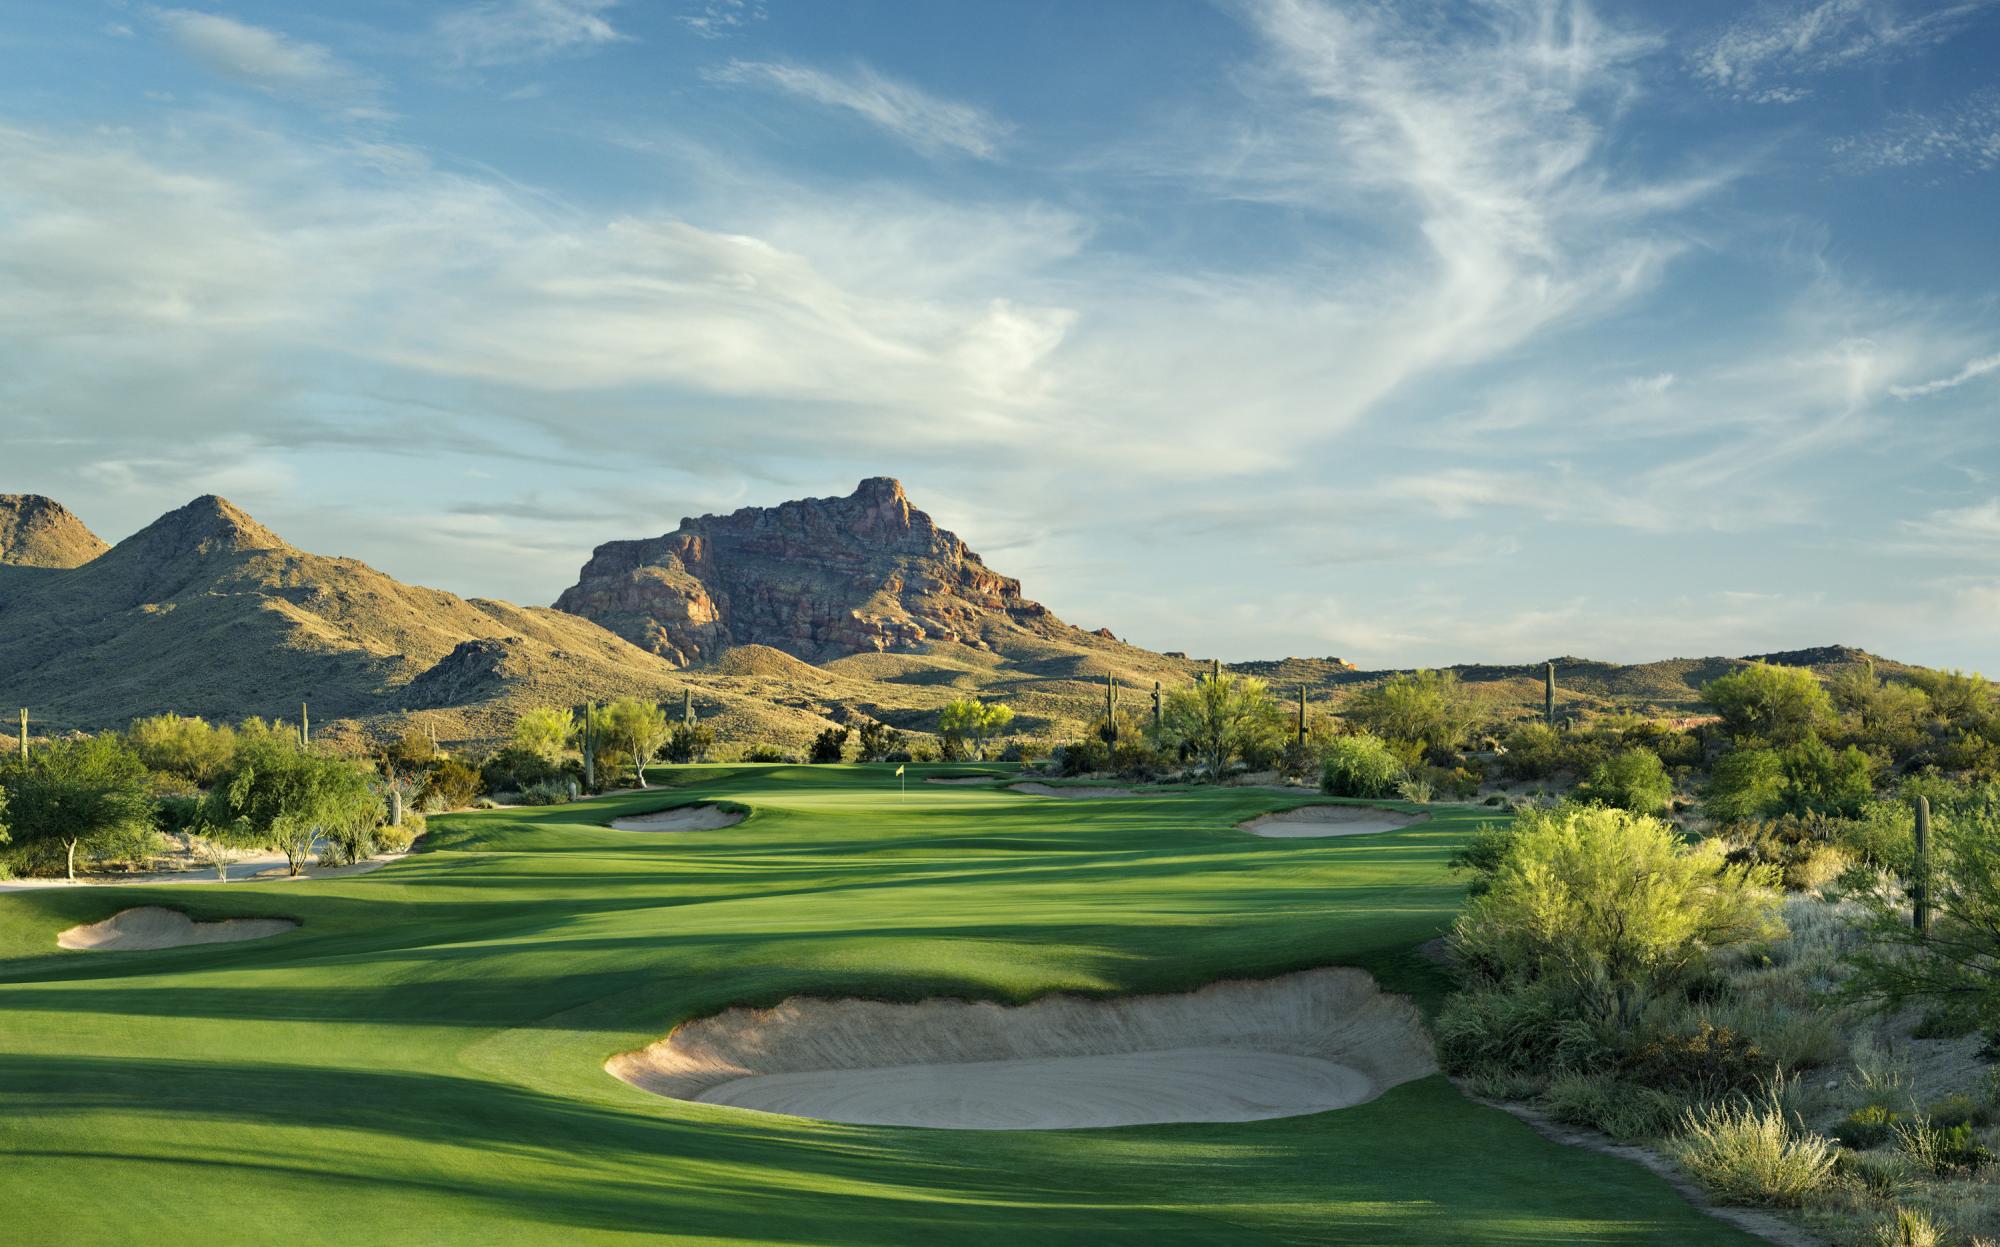 We-Ko-Pa Resort Golf has got some of the premiere golf course within Arizona